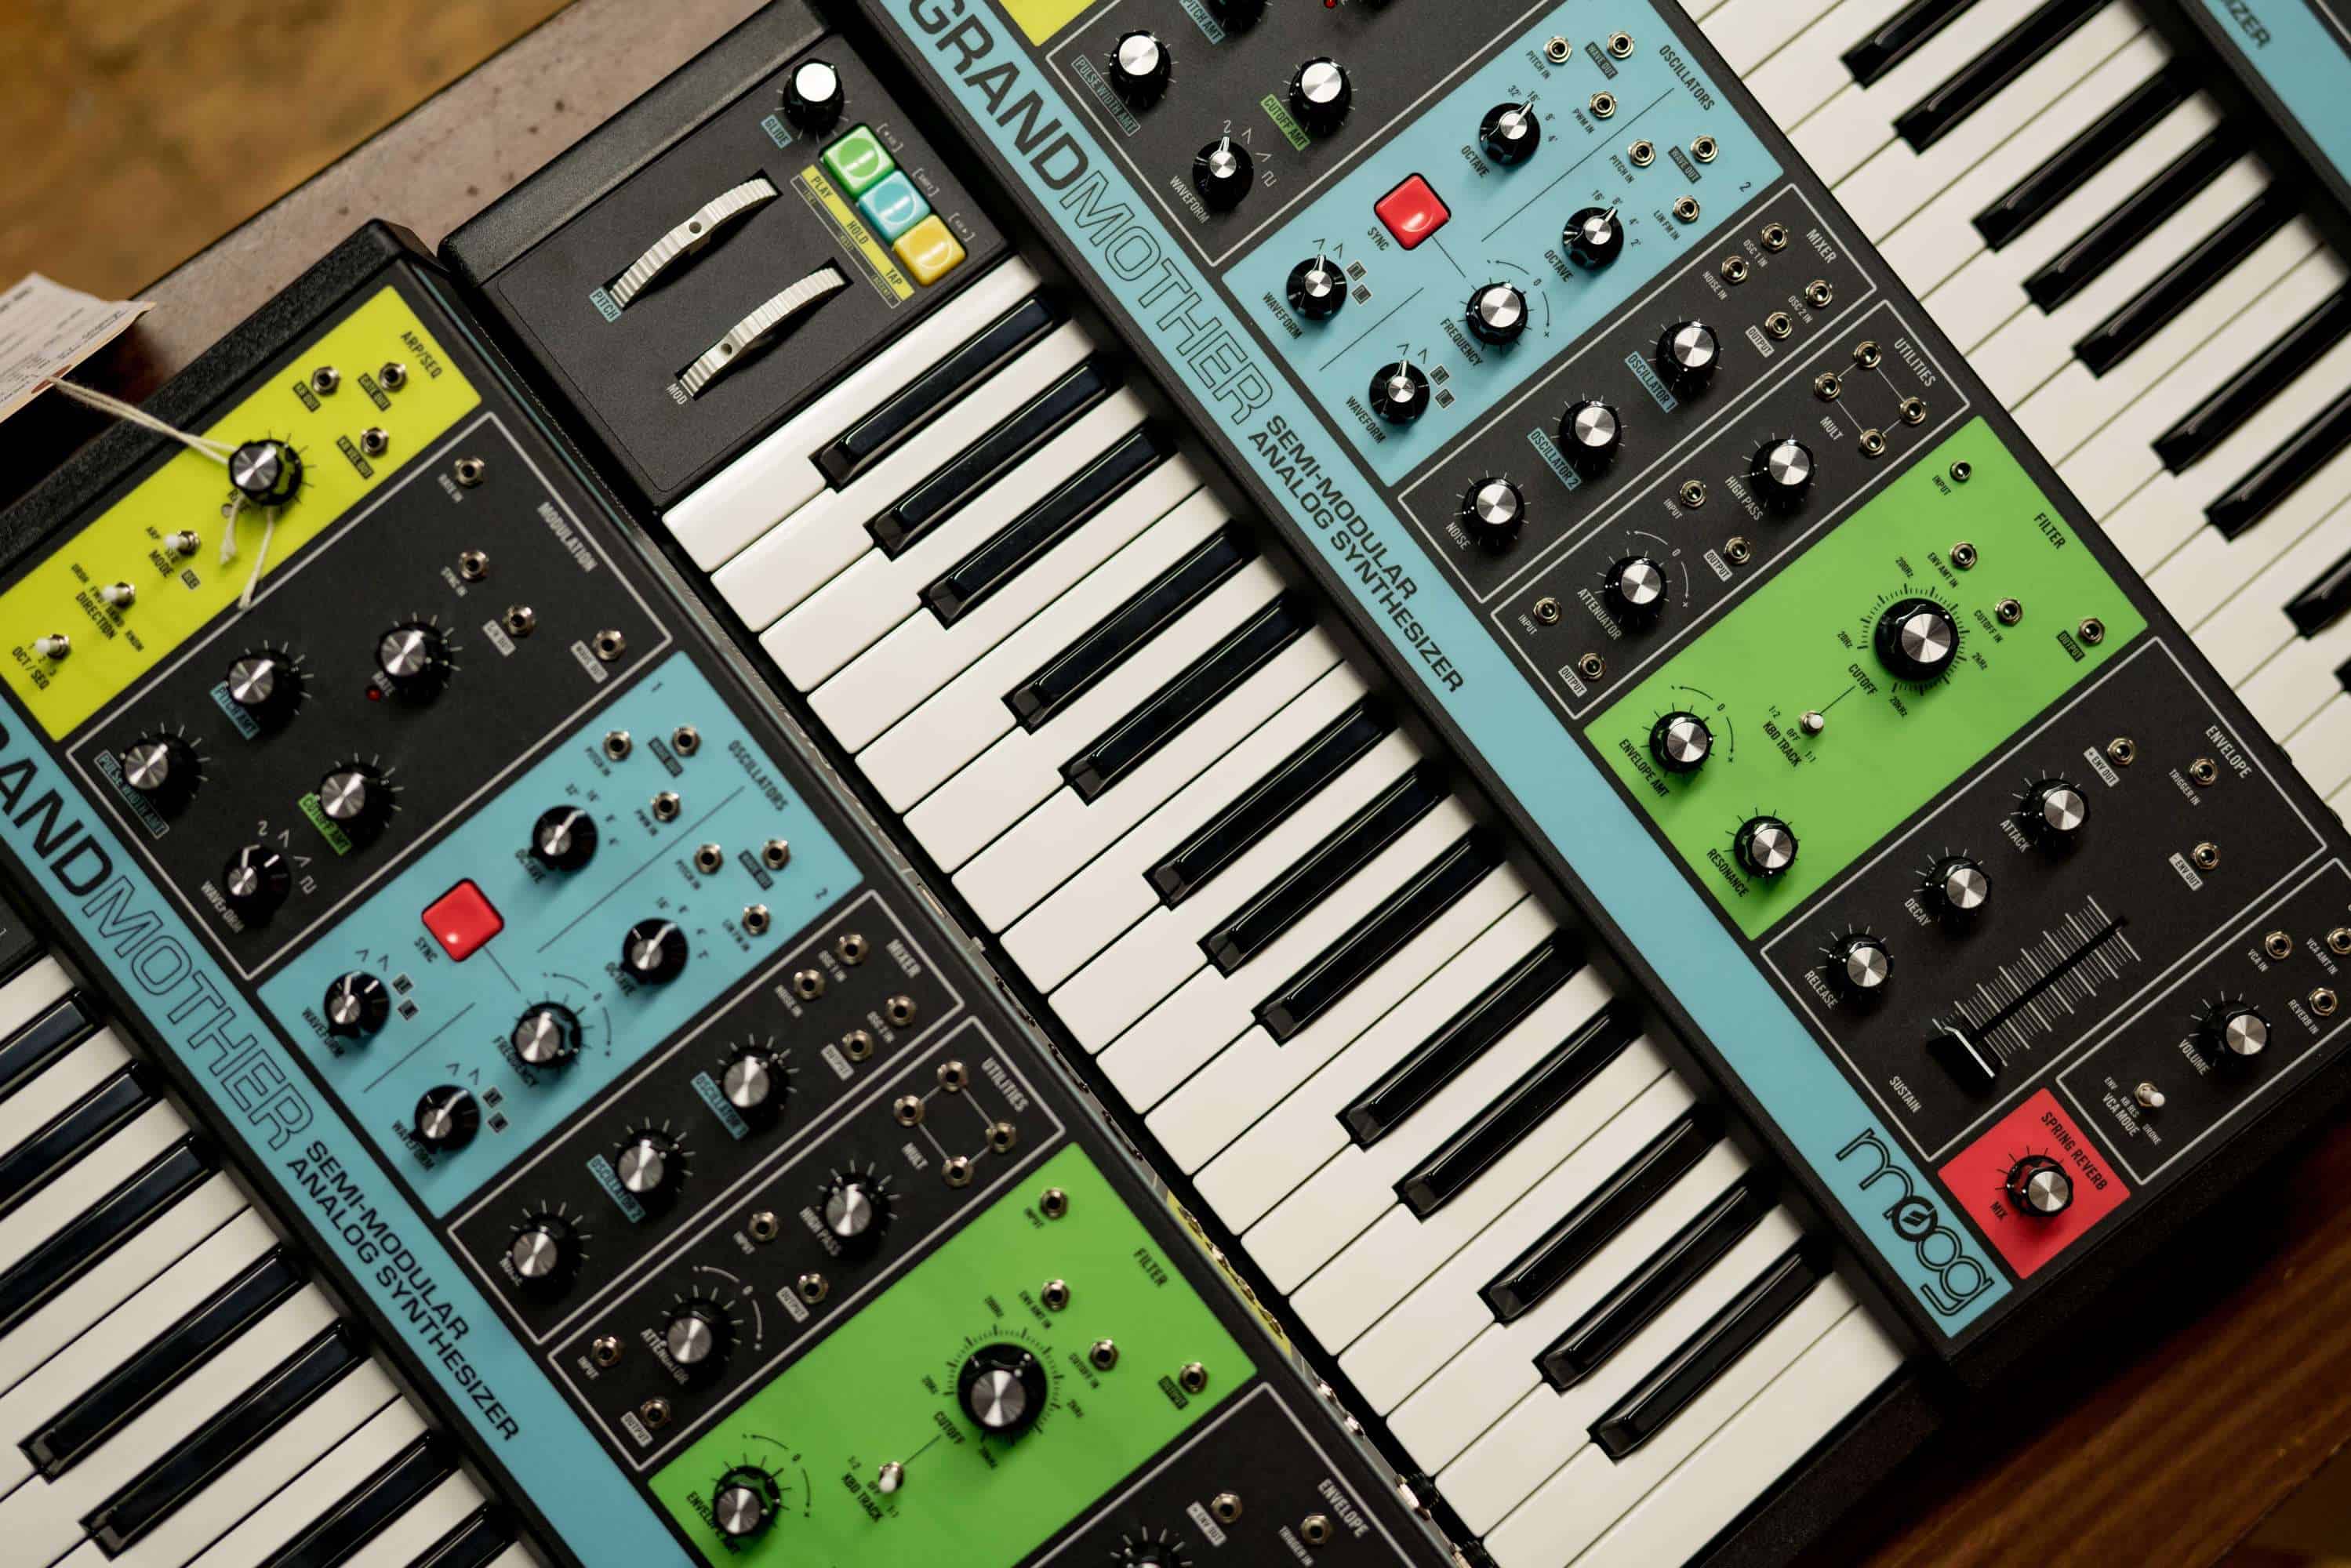 Moog Grandmother Firmware v1.0.6 Now Available